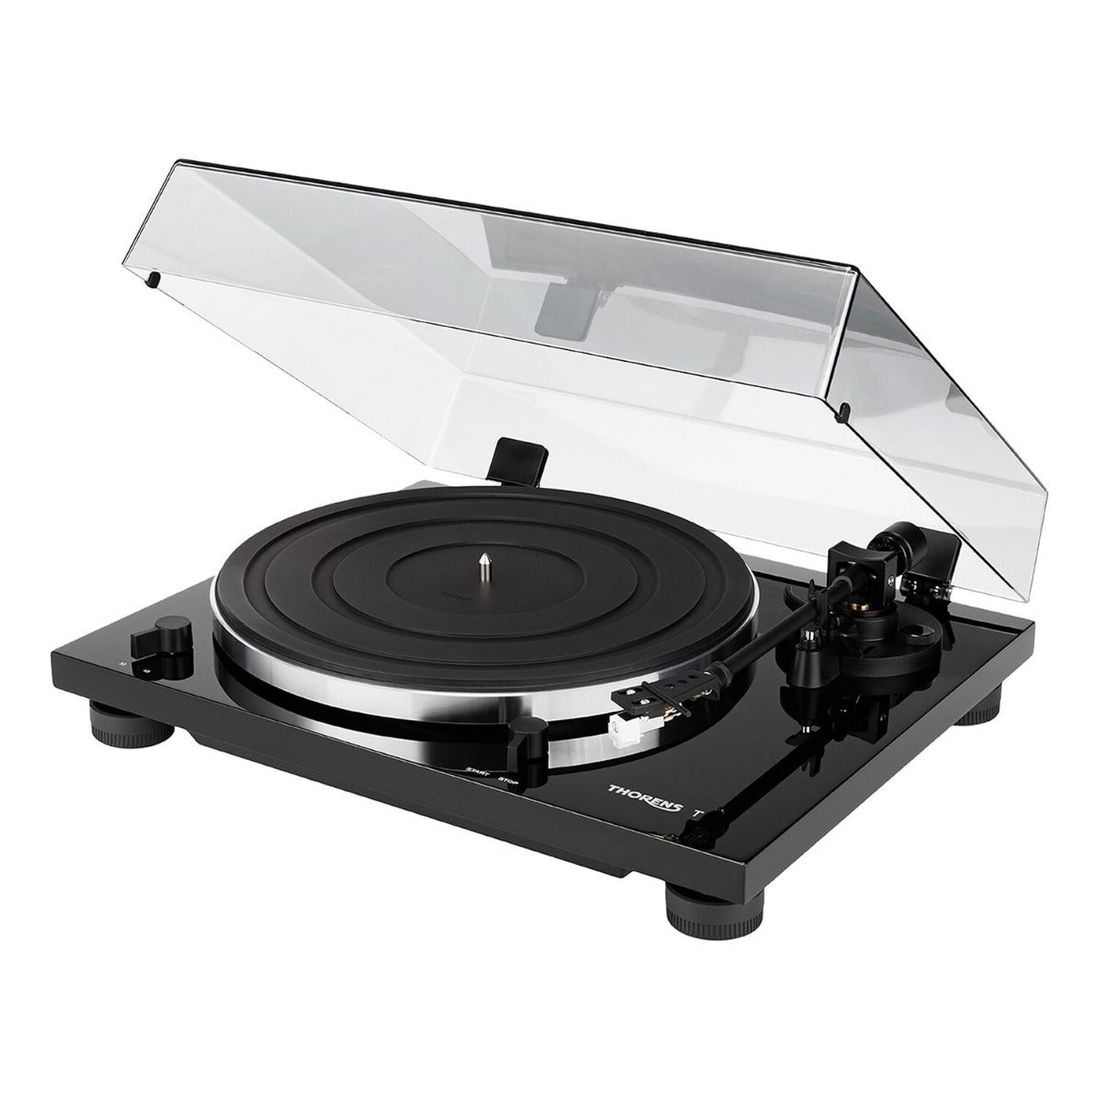 Thorens TD-201 Manual Two-Speed Belt-Drive Turntable with Built-in Preamp - Black High Gloss